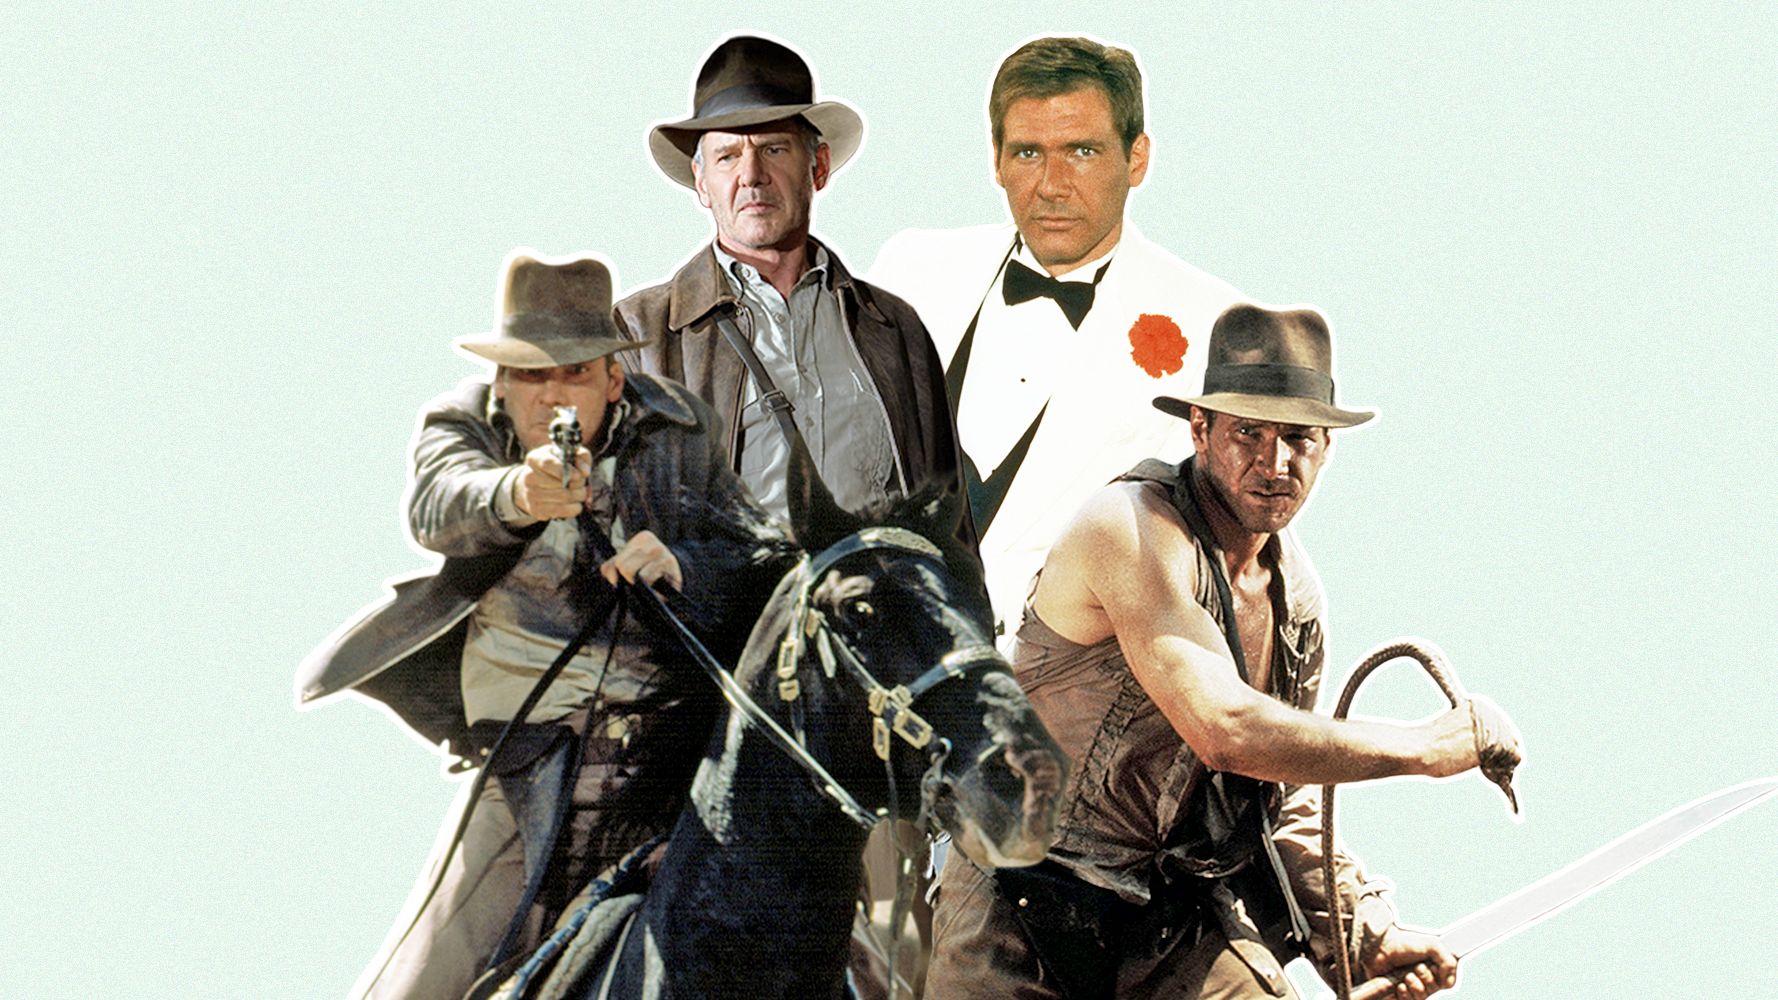 Indiana Jones' Movies in Order - How to Stream The 'Indiana Jones' Movies  in Chronological Plot Order